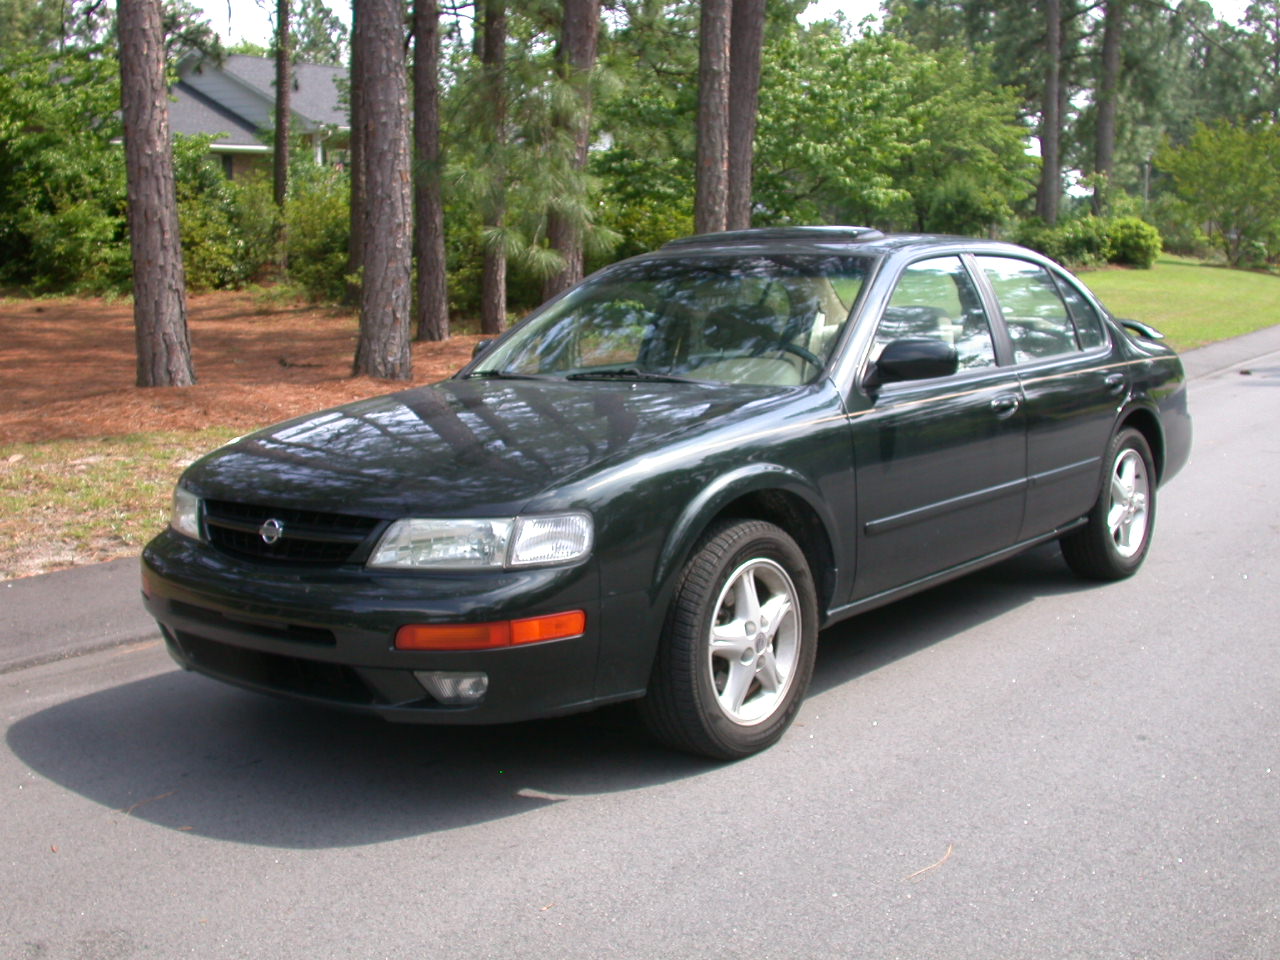 1997 Nissan maxima picture gallery #3